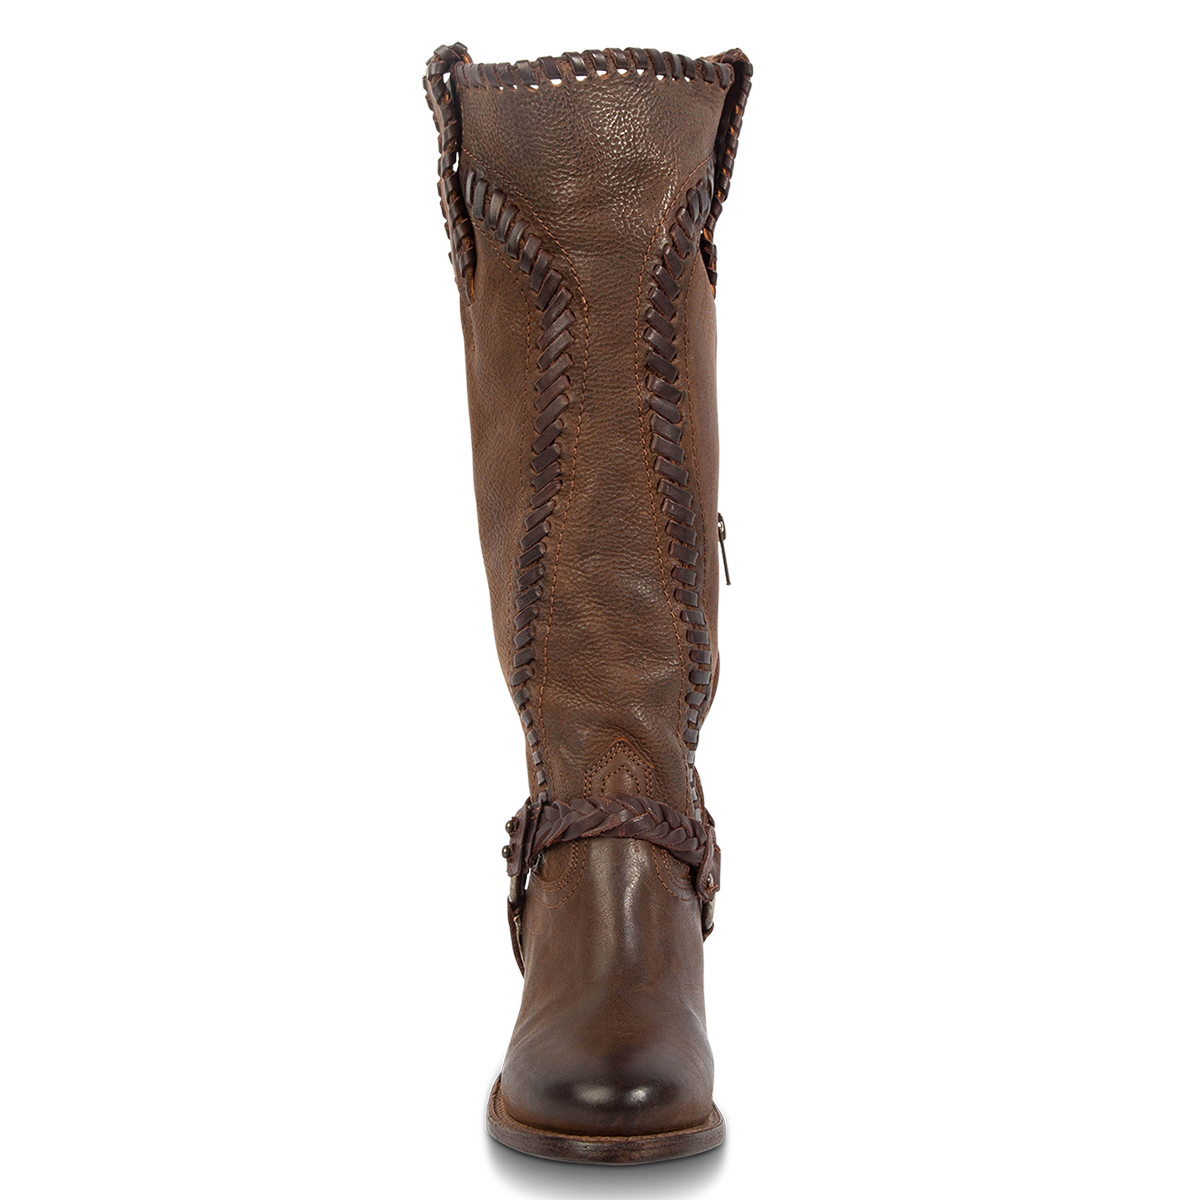 Front view showing whip stitch detailing, braided ankle harness and round toe on FREEBIRD women's Clover brown leather boot